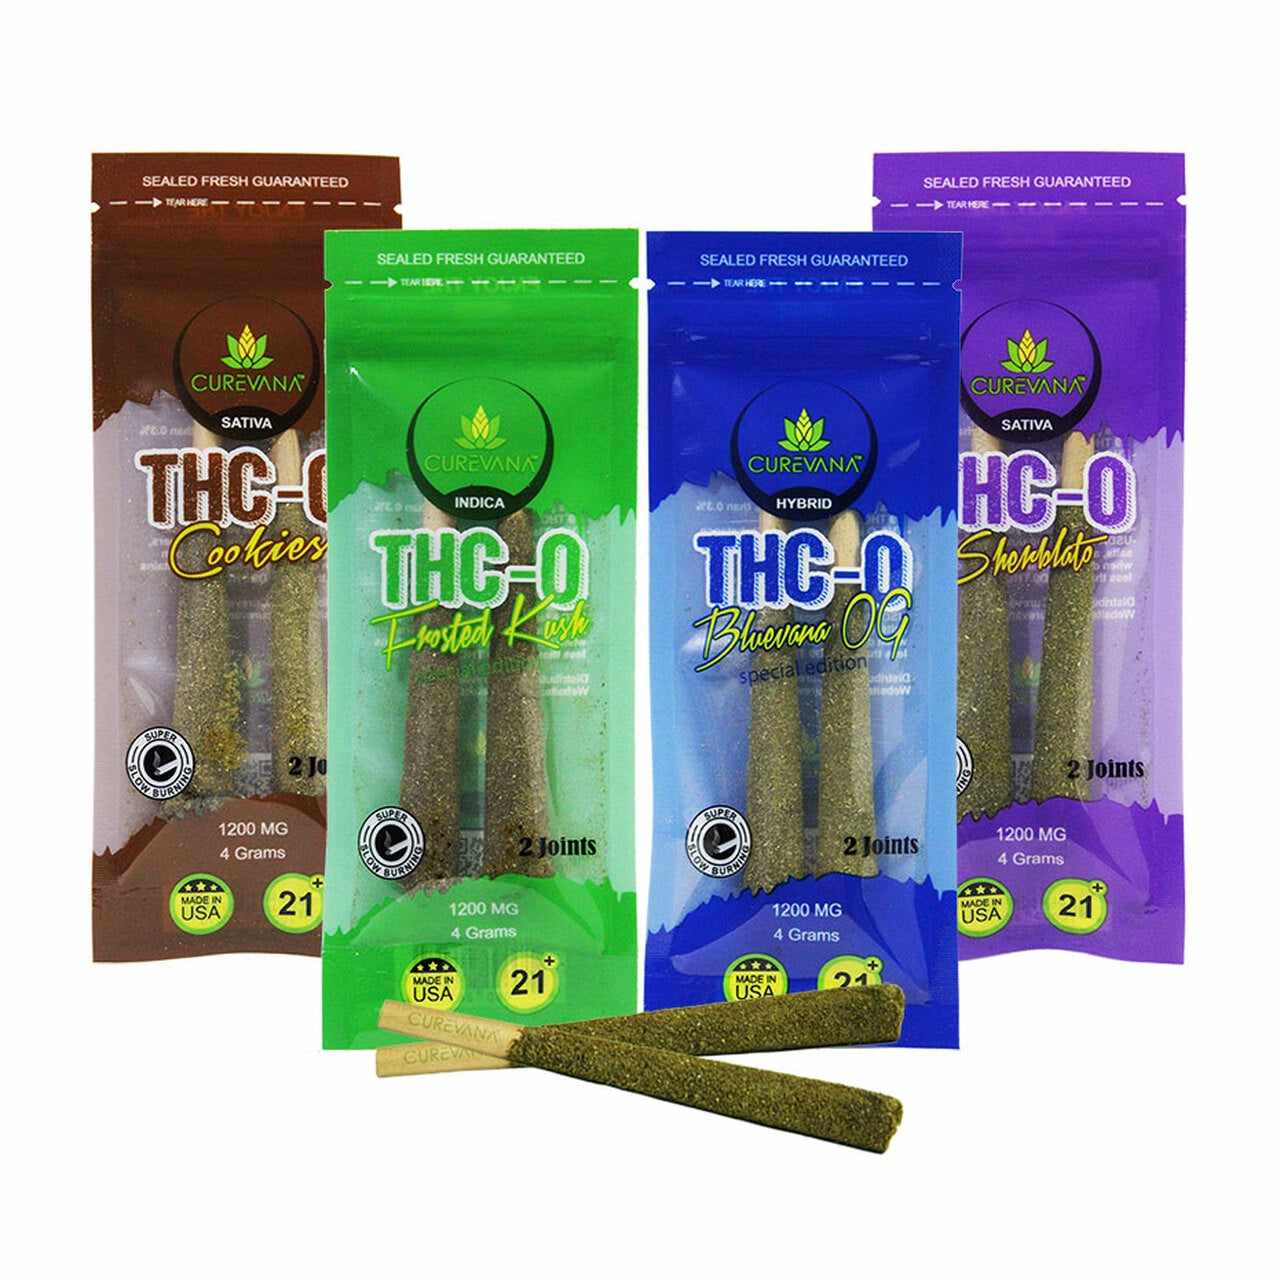 Curevana THC-O Caviar Style Pre-Rolled Cones 2pk - 12ct Display